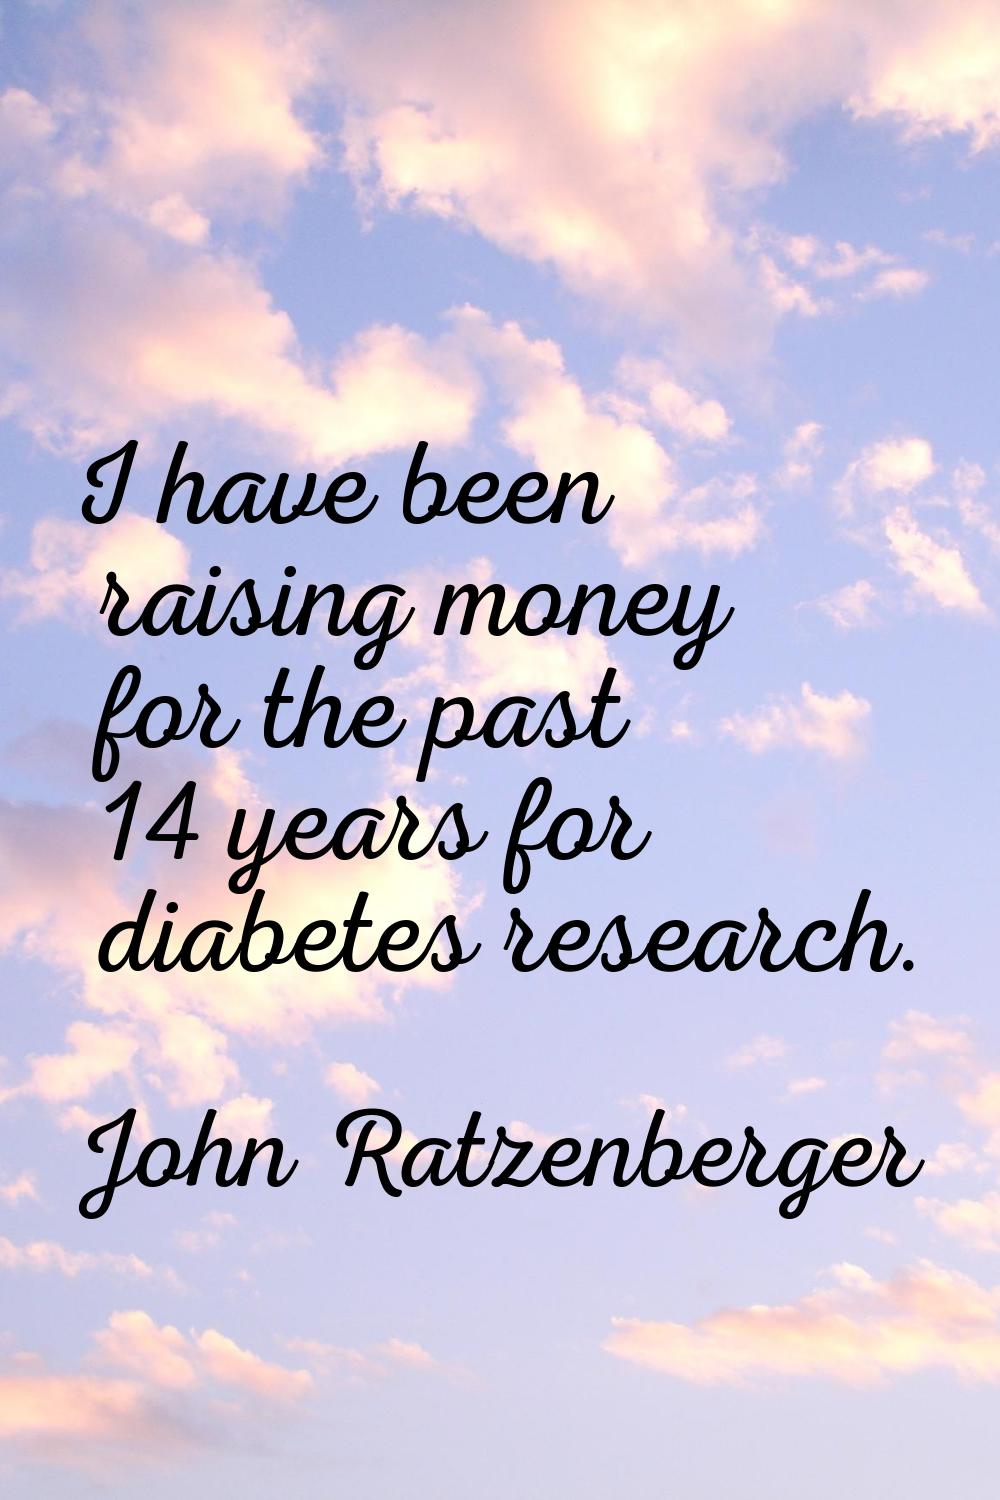 I have been raising money for the past 14 years for diabetes research.